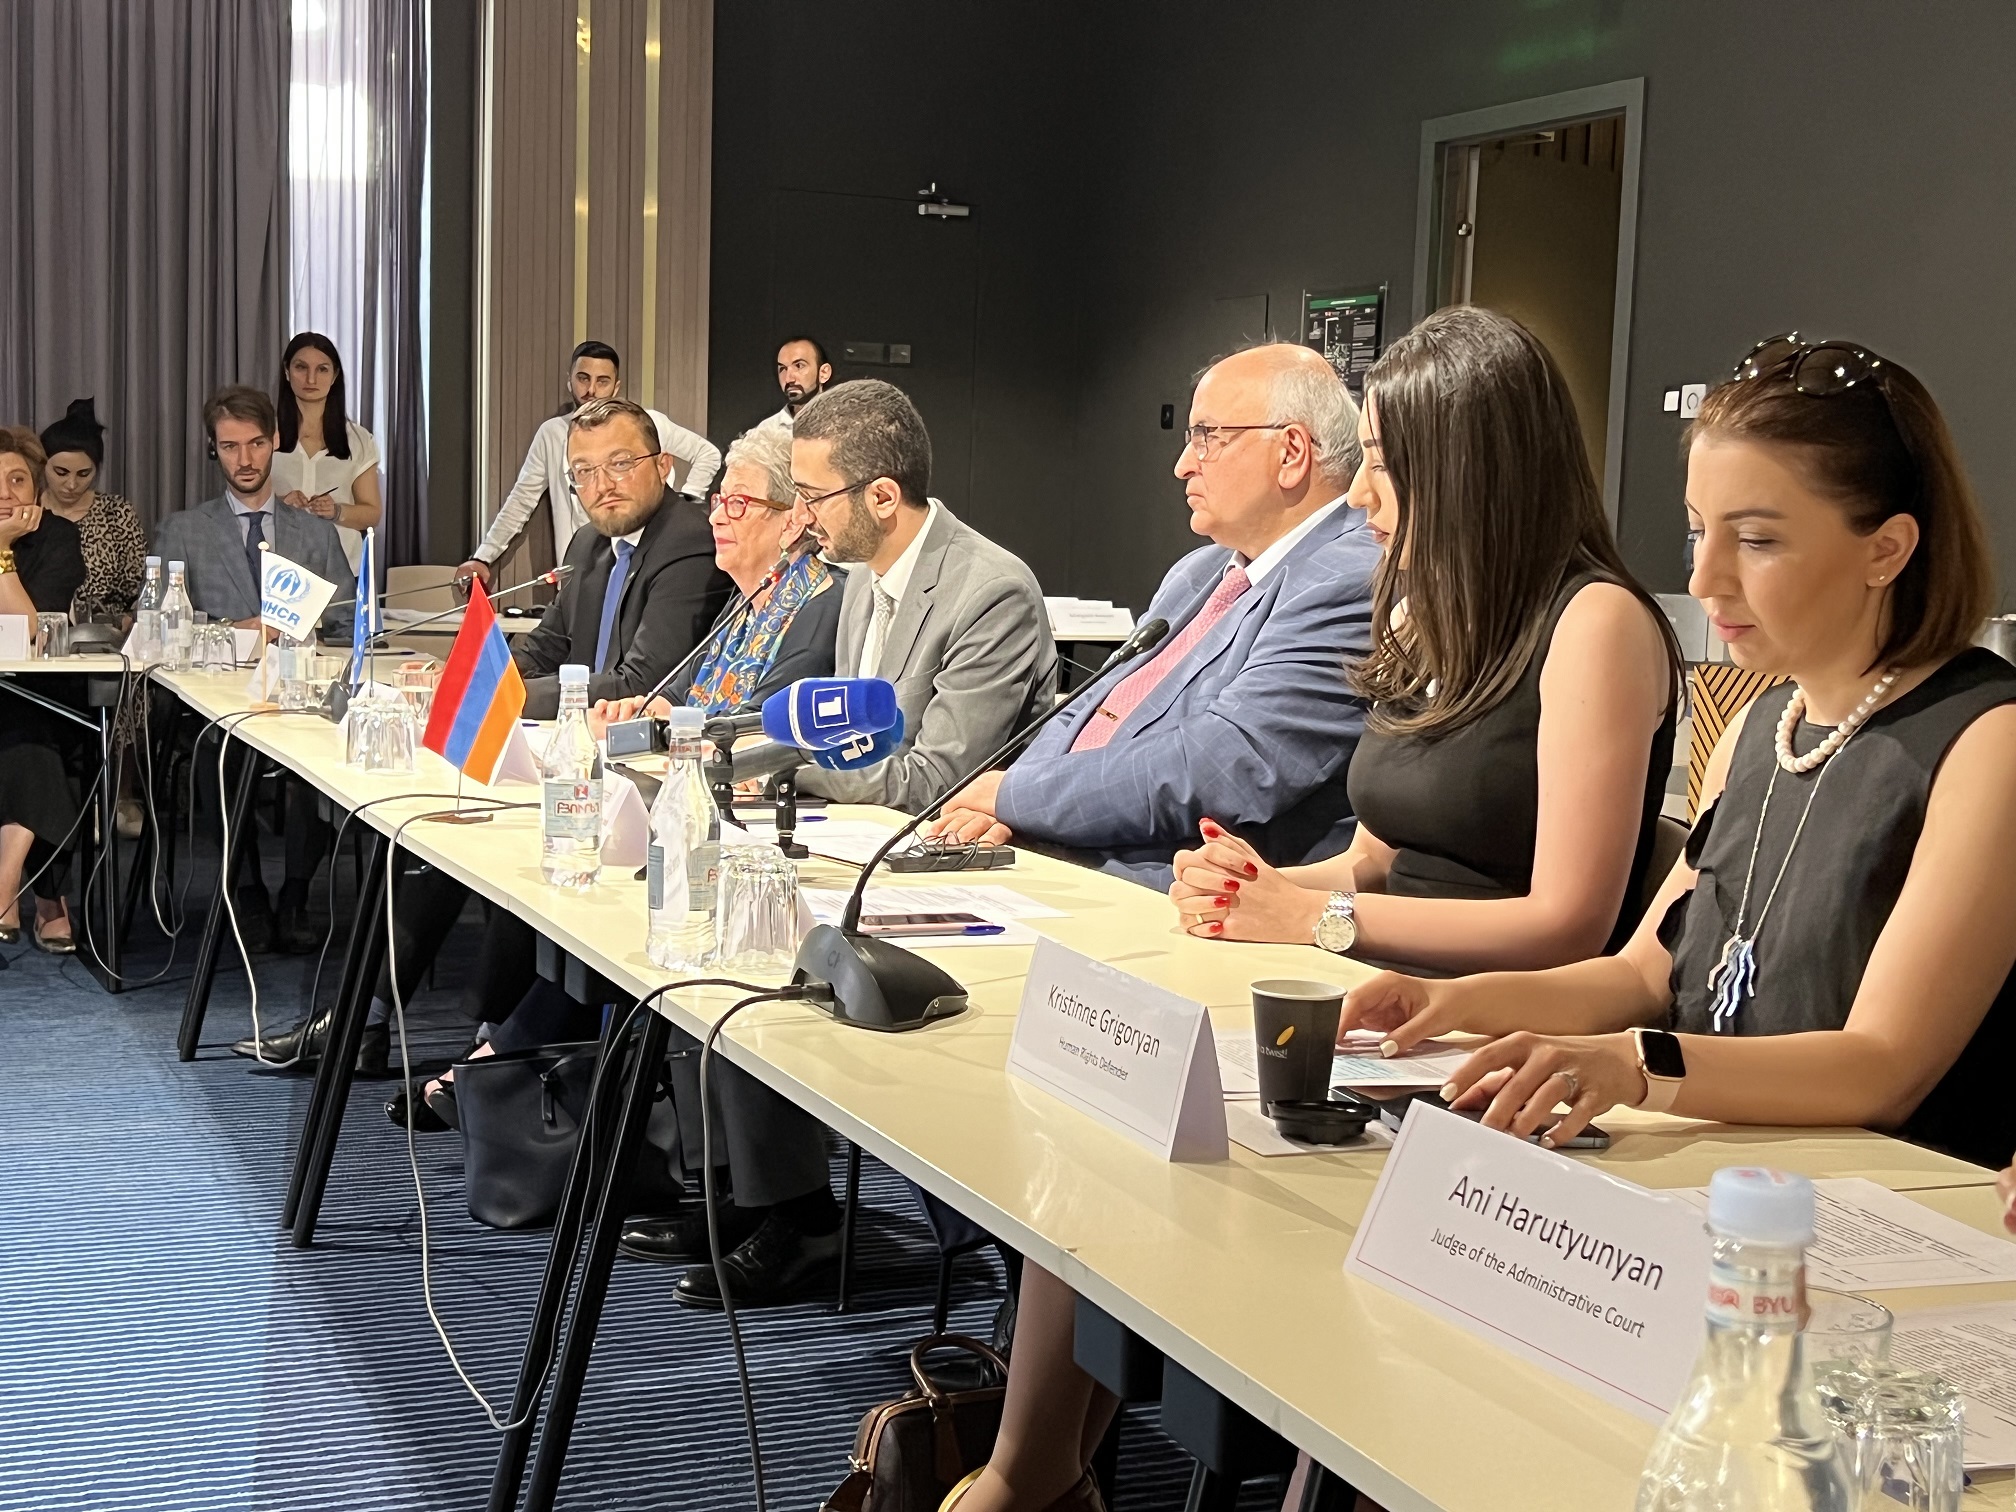 UNHCR – Migration Service kick-off meeting with stakeholders